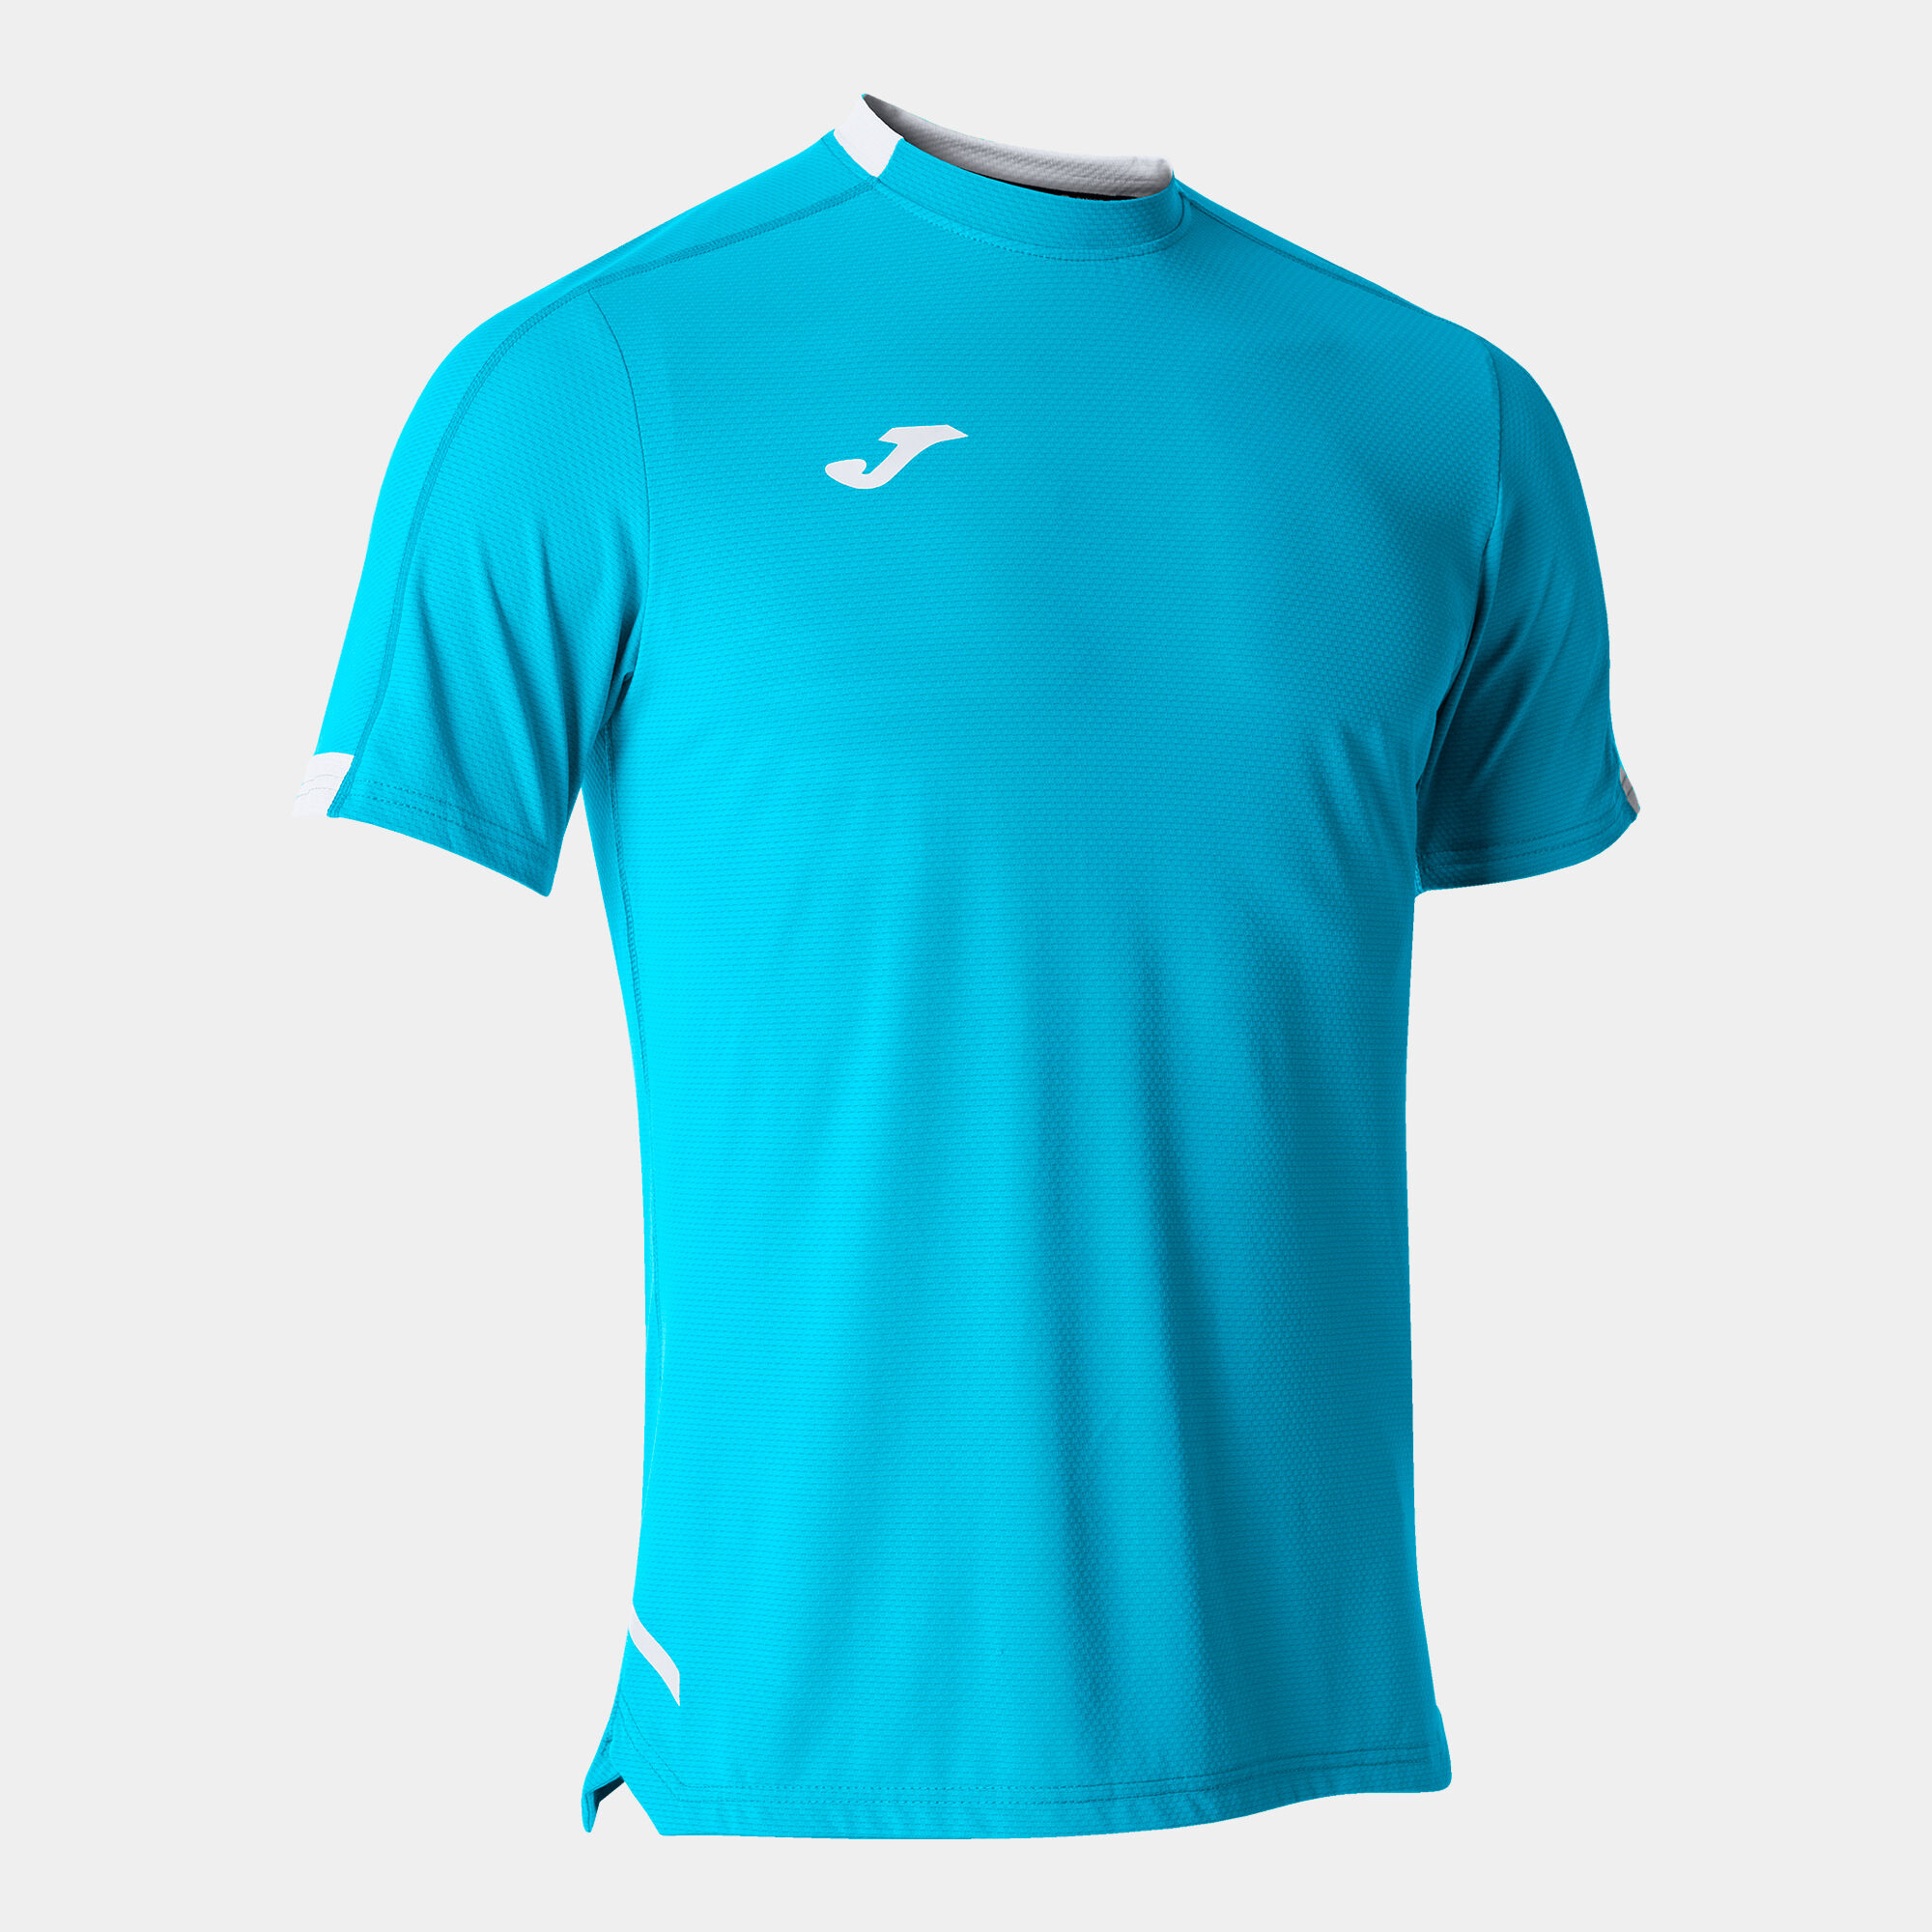 MAILLOT MANCHES COURTES HOMME SMASH TURQUOISE FLUO